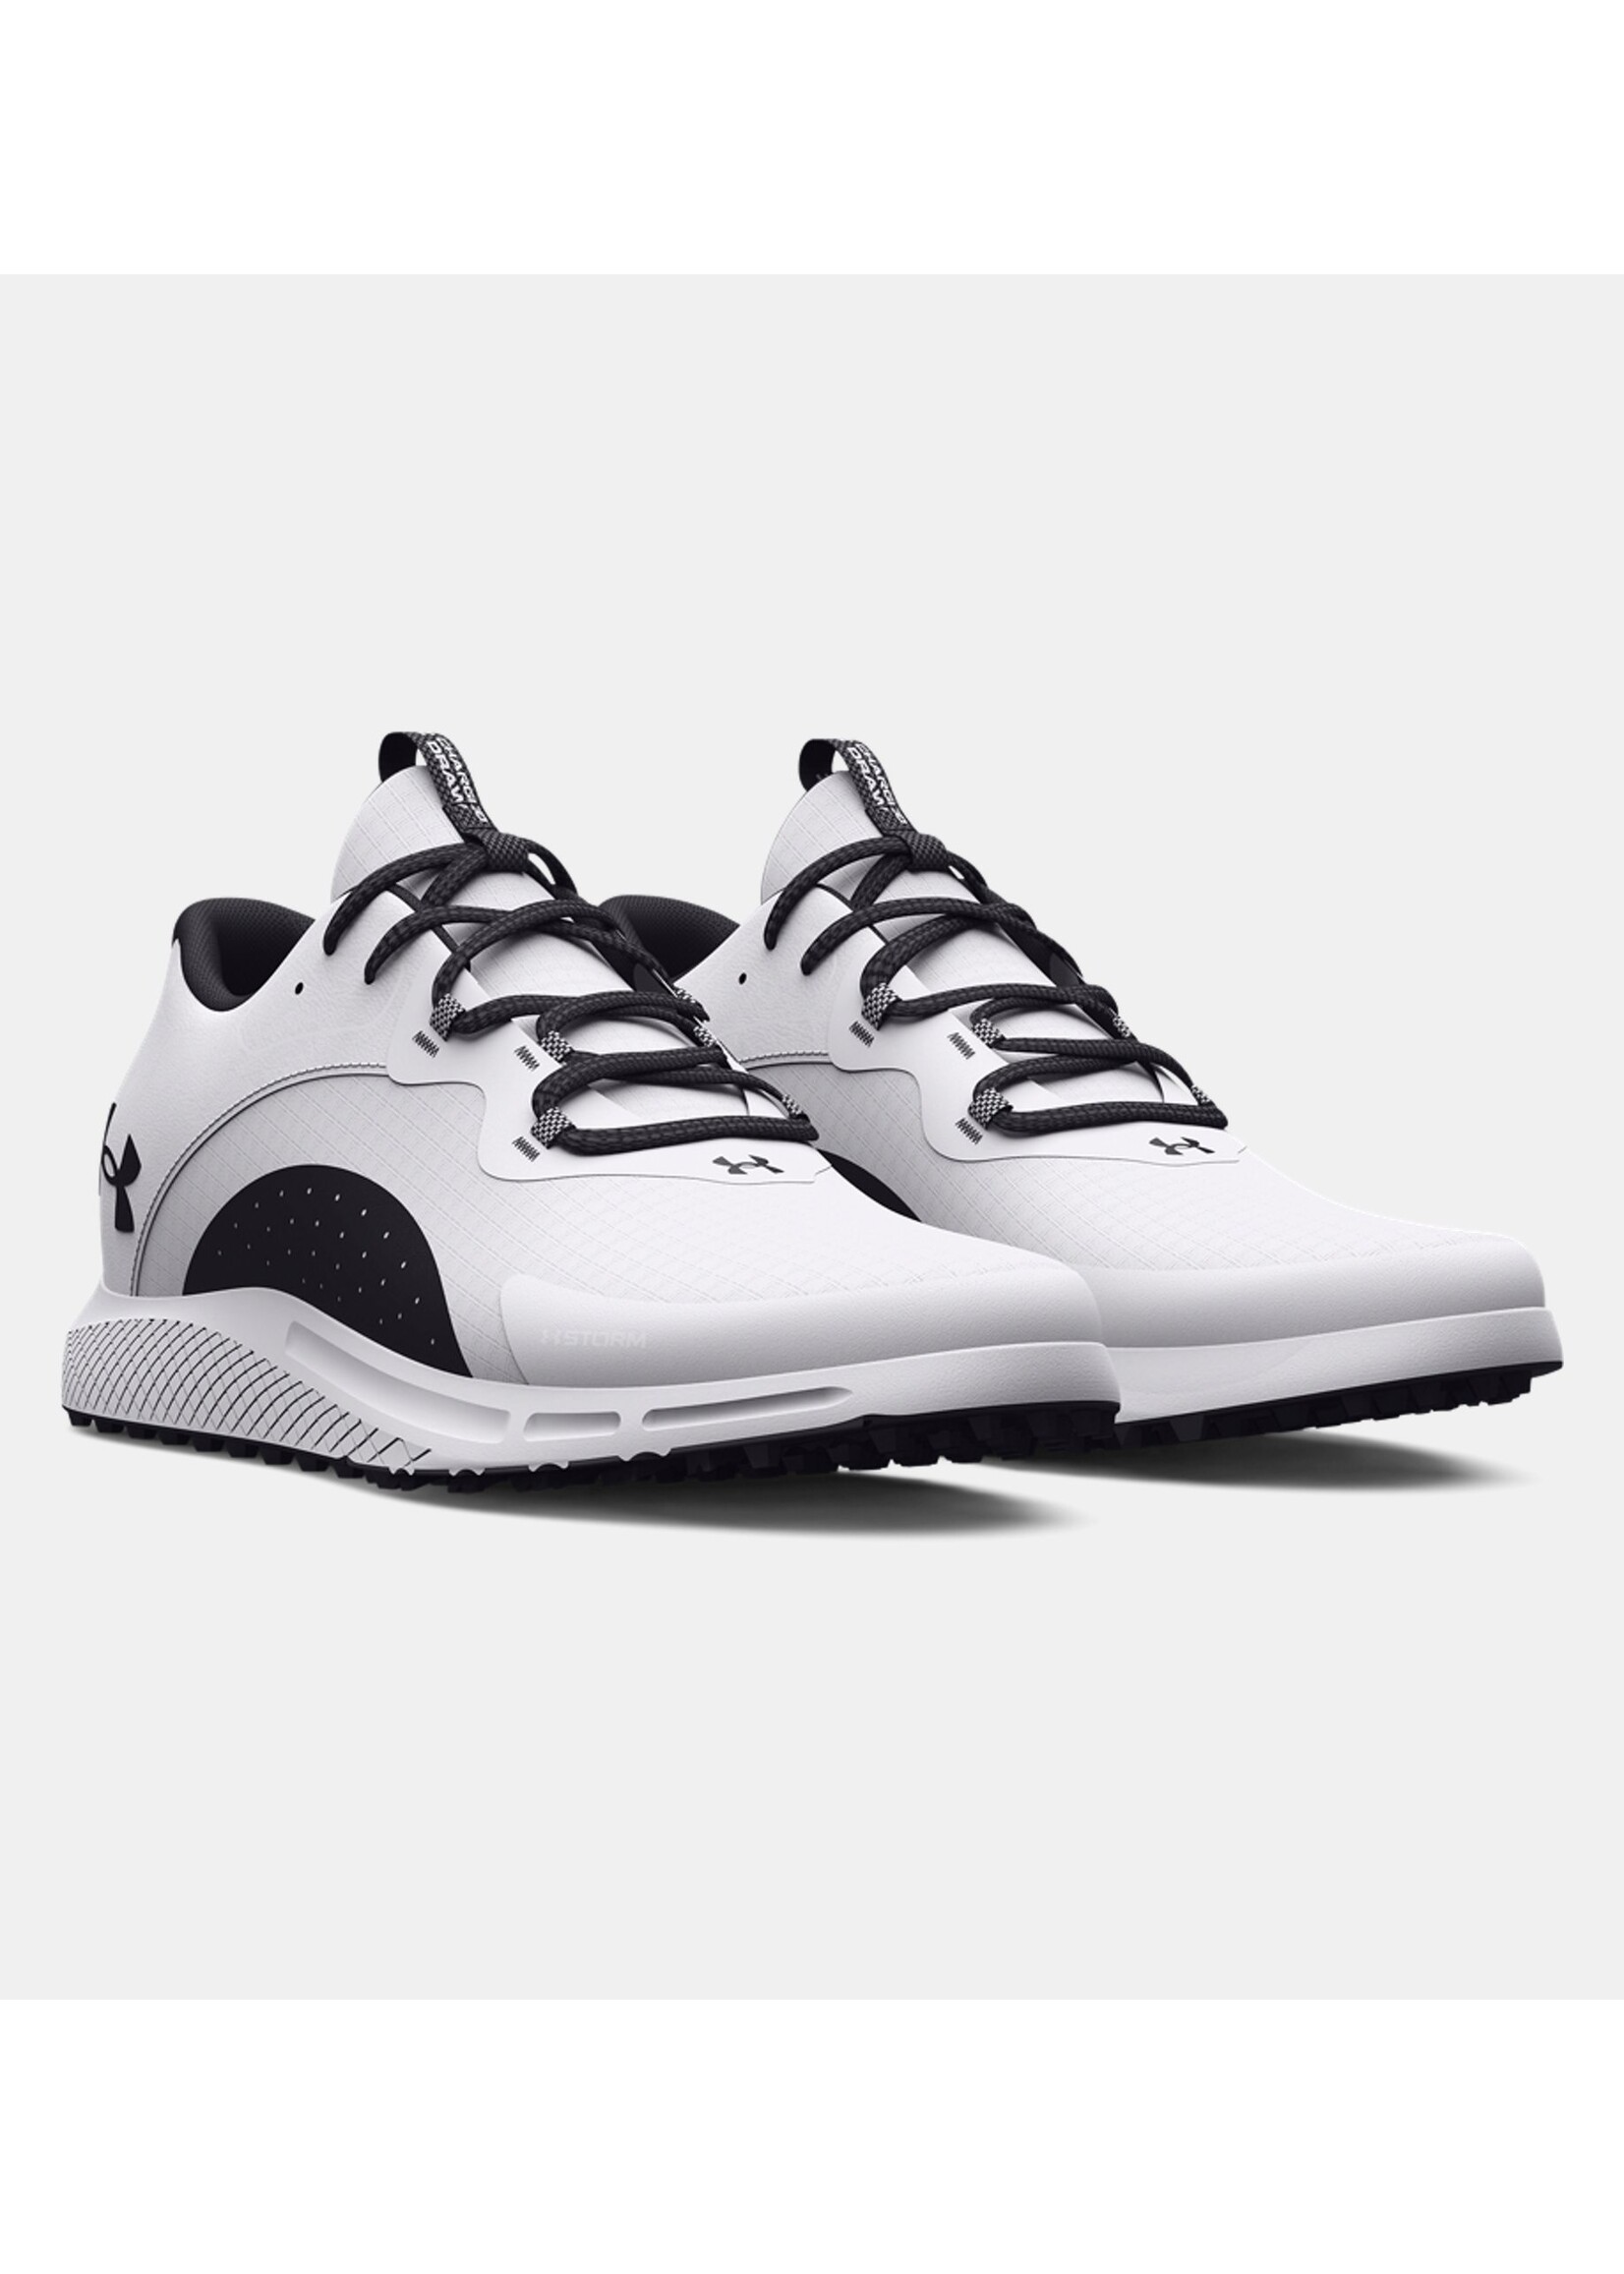 UNDER ARMOUR Men's UA Charged Draw 2 Spikeless Golf Shoes